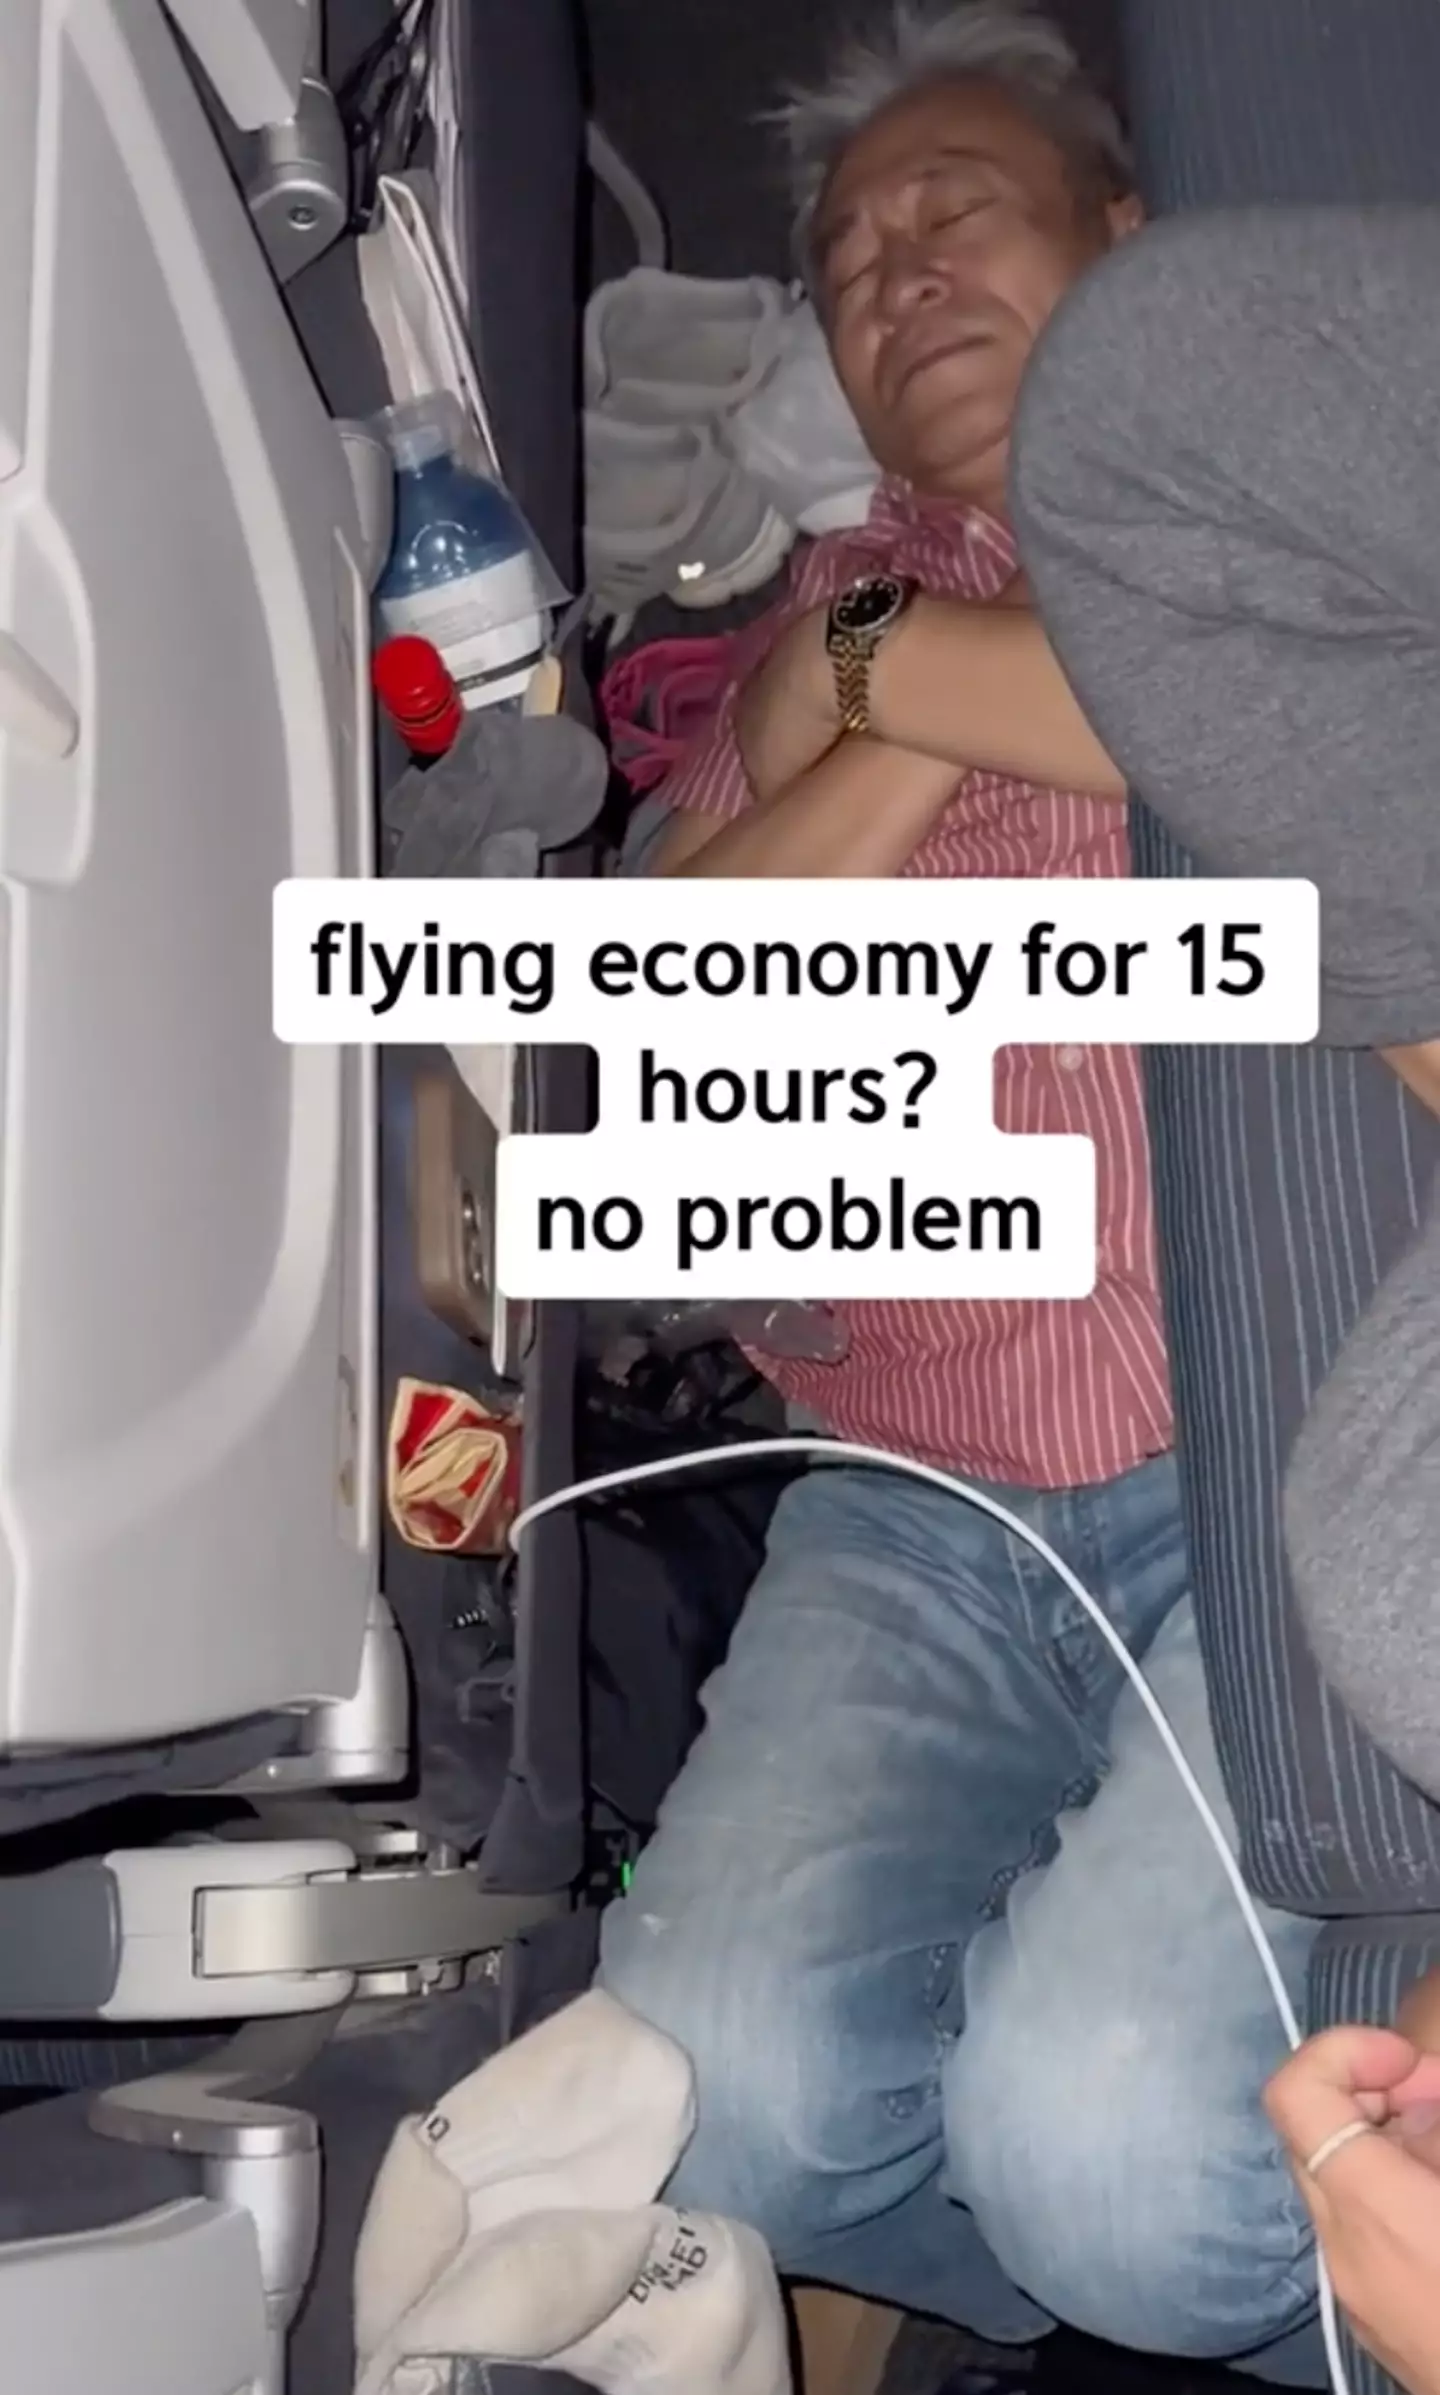 Natalie showed her dad sleeping on the floor of the plane in a viral TikTok video.